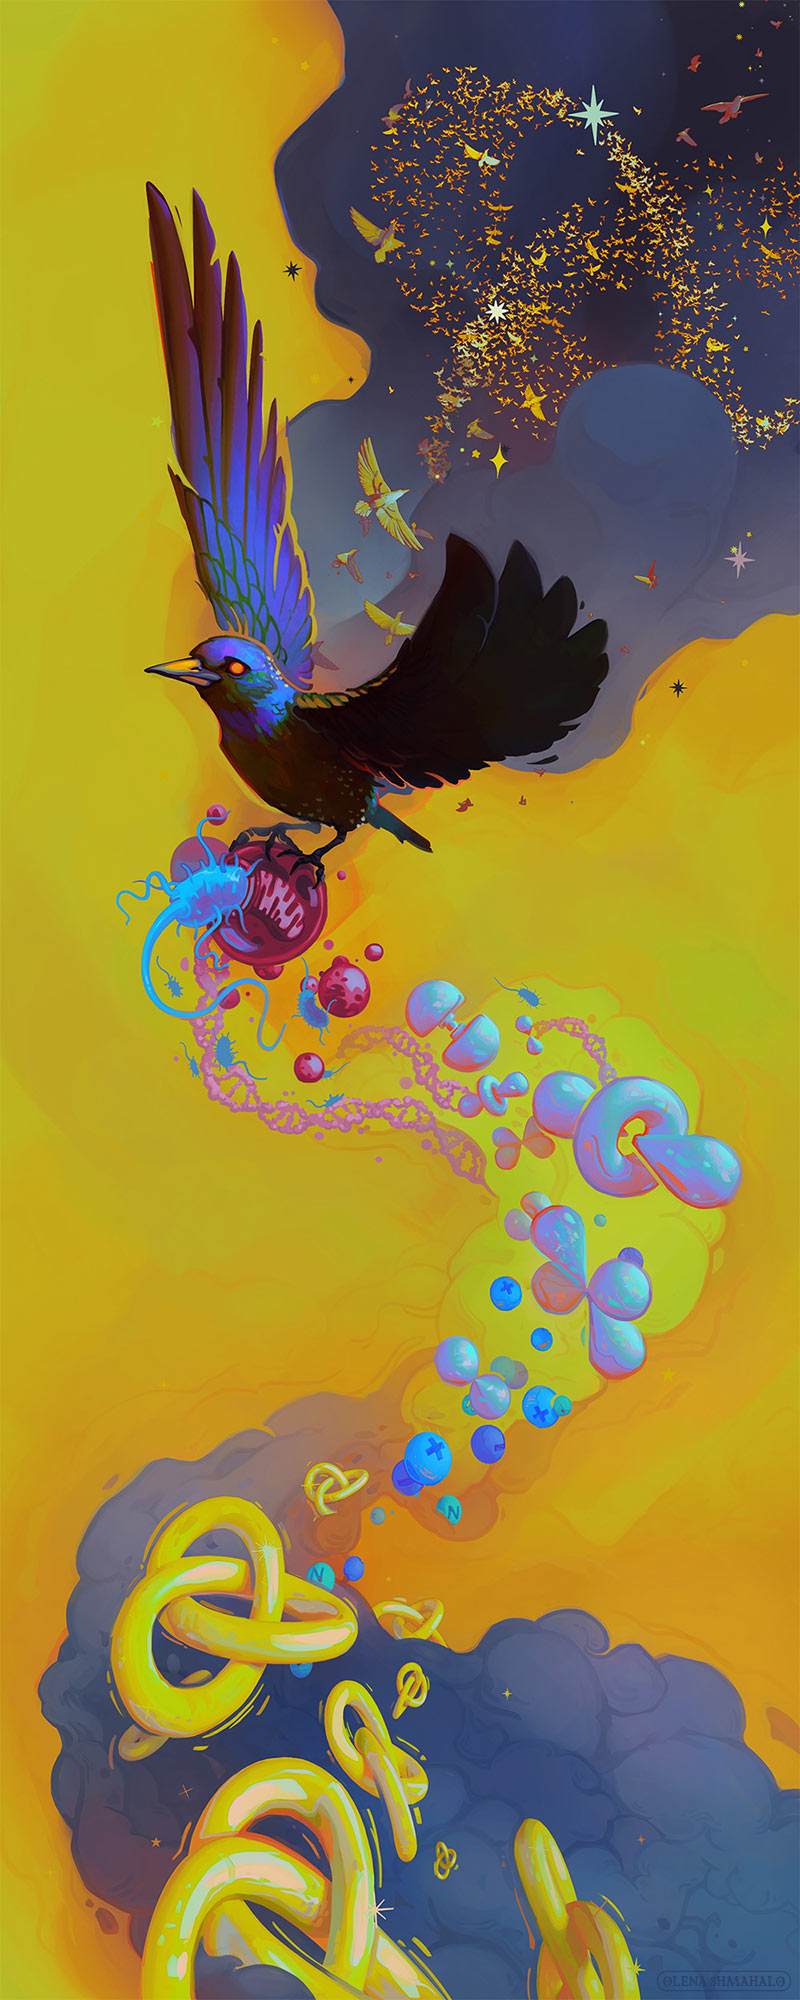 Painting: on a yellow background, a starling carries a eukaryotic cell being entered by a prokaryote, with DNA, electron orbitals, particles, and trefoil knots trailing off of it. Above the main bird, a murmuration of starlings forms a trefoil knot.